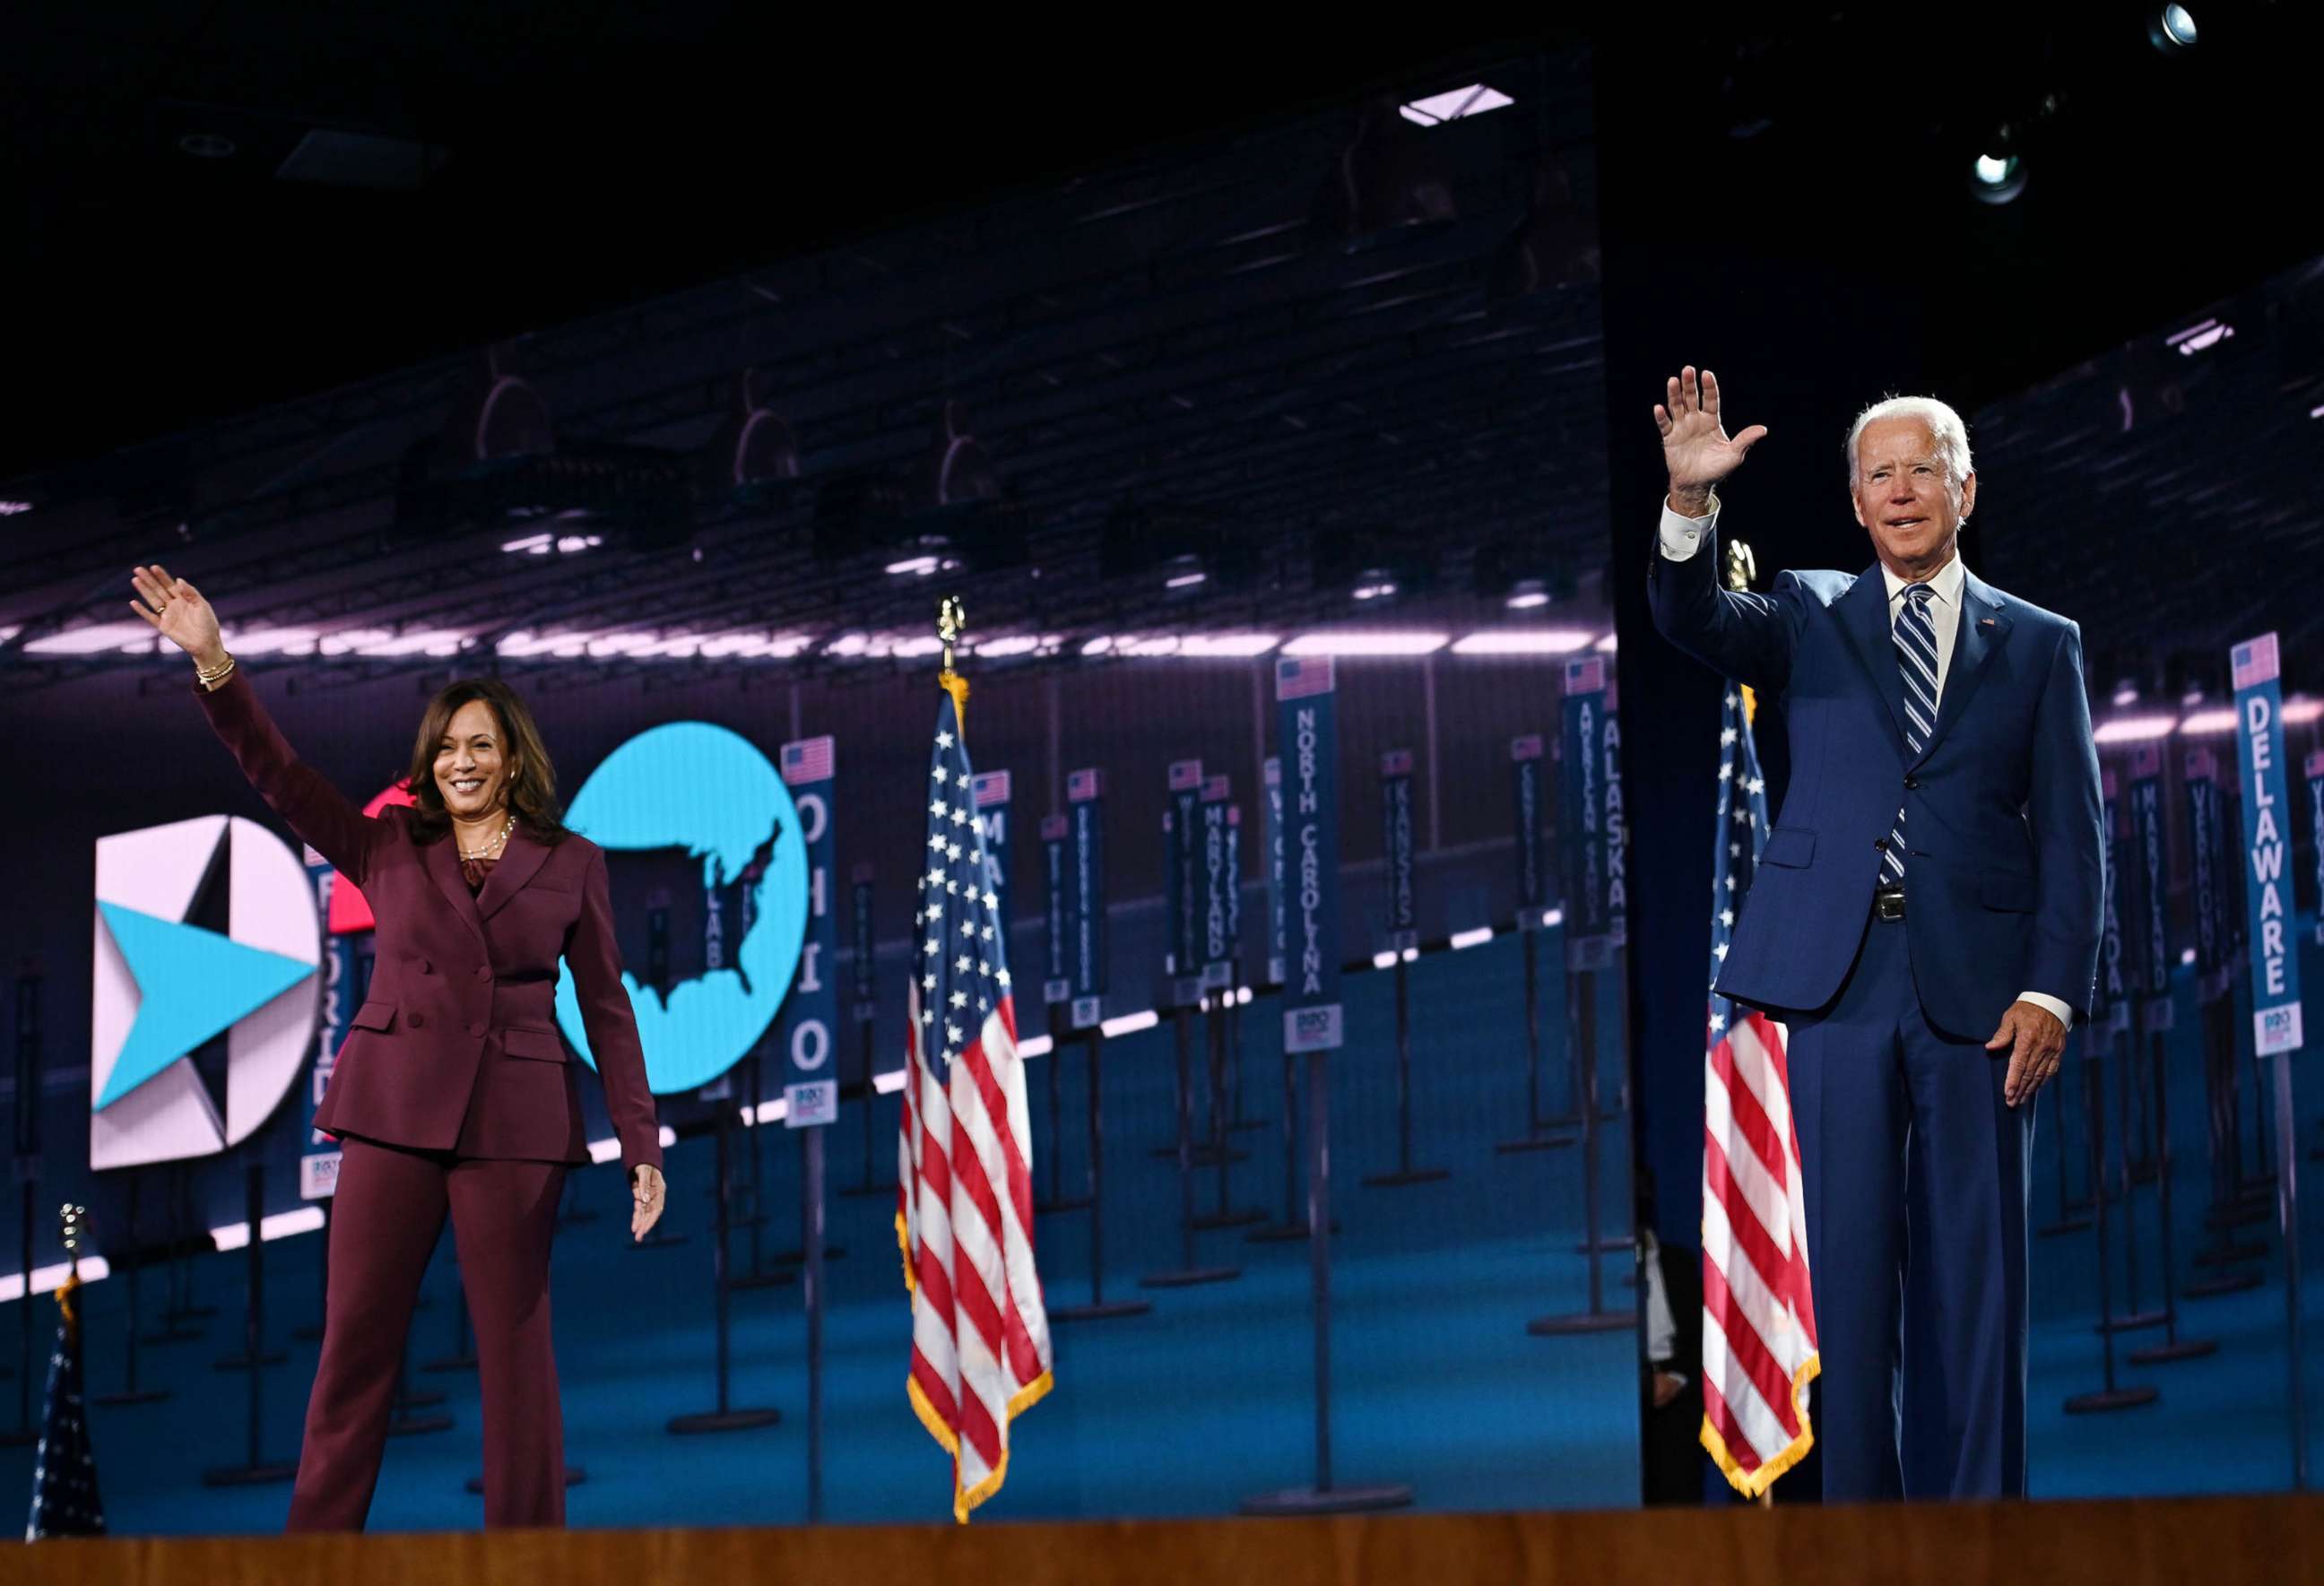 PHOTO: Sen. Kamala Harris and former Vice President Joe Biden wave from the stage at the end of the third day of the Democratic National Convention, in Wilmington, Del., Aug. 19, 2020.